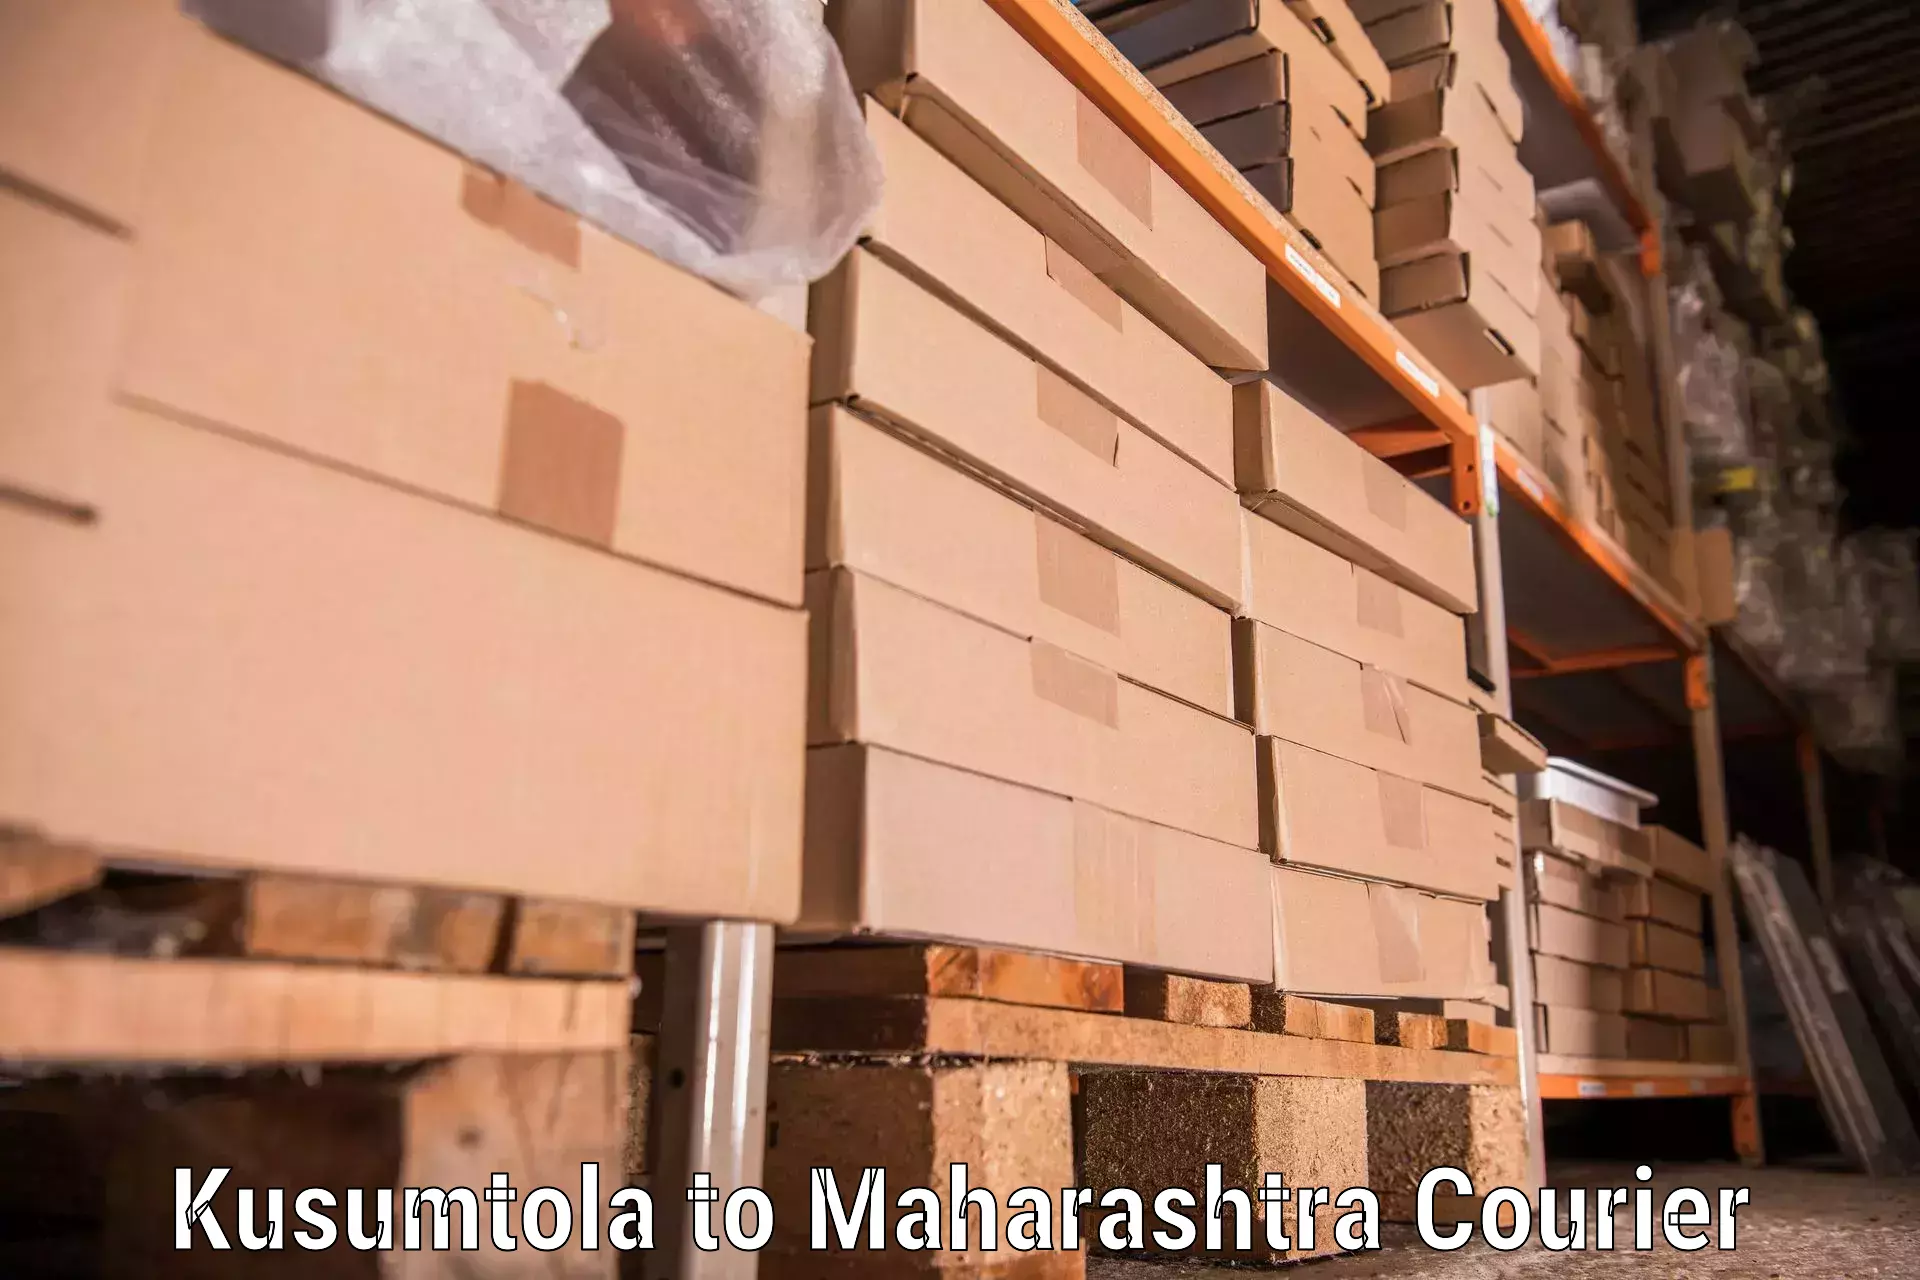 Quality relocation assistance in Kusumtola to Jath